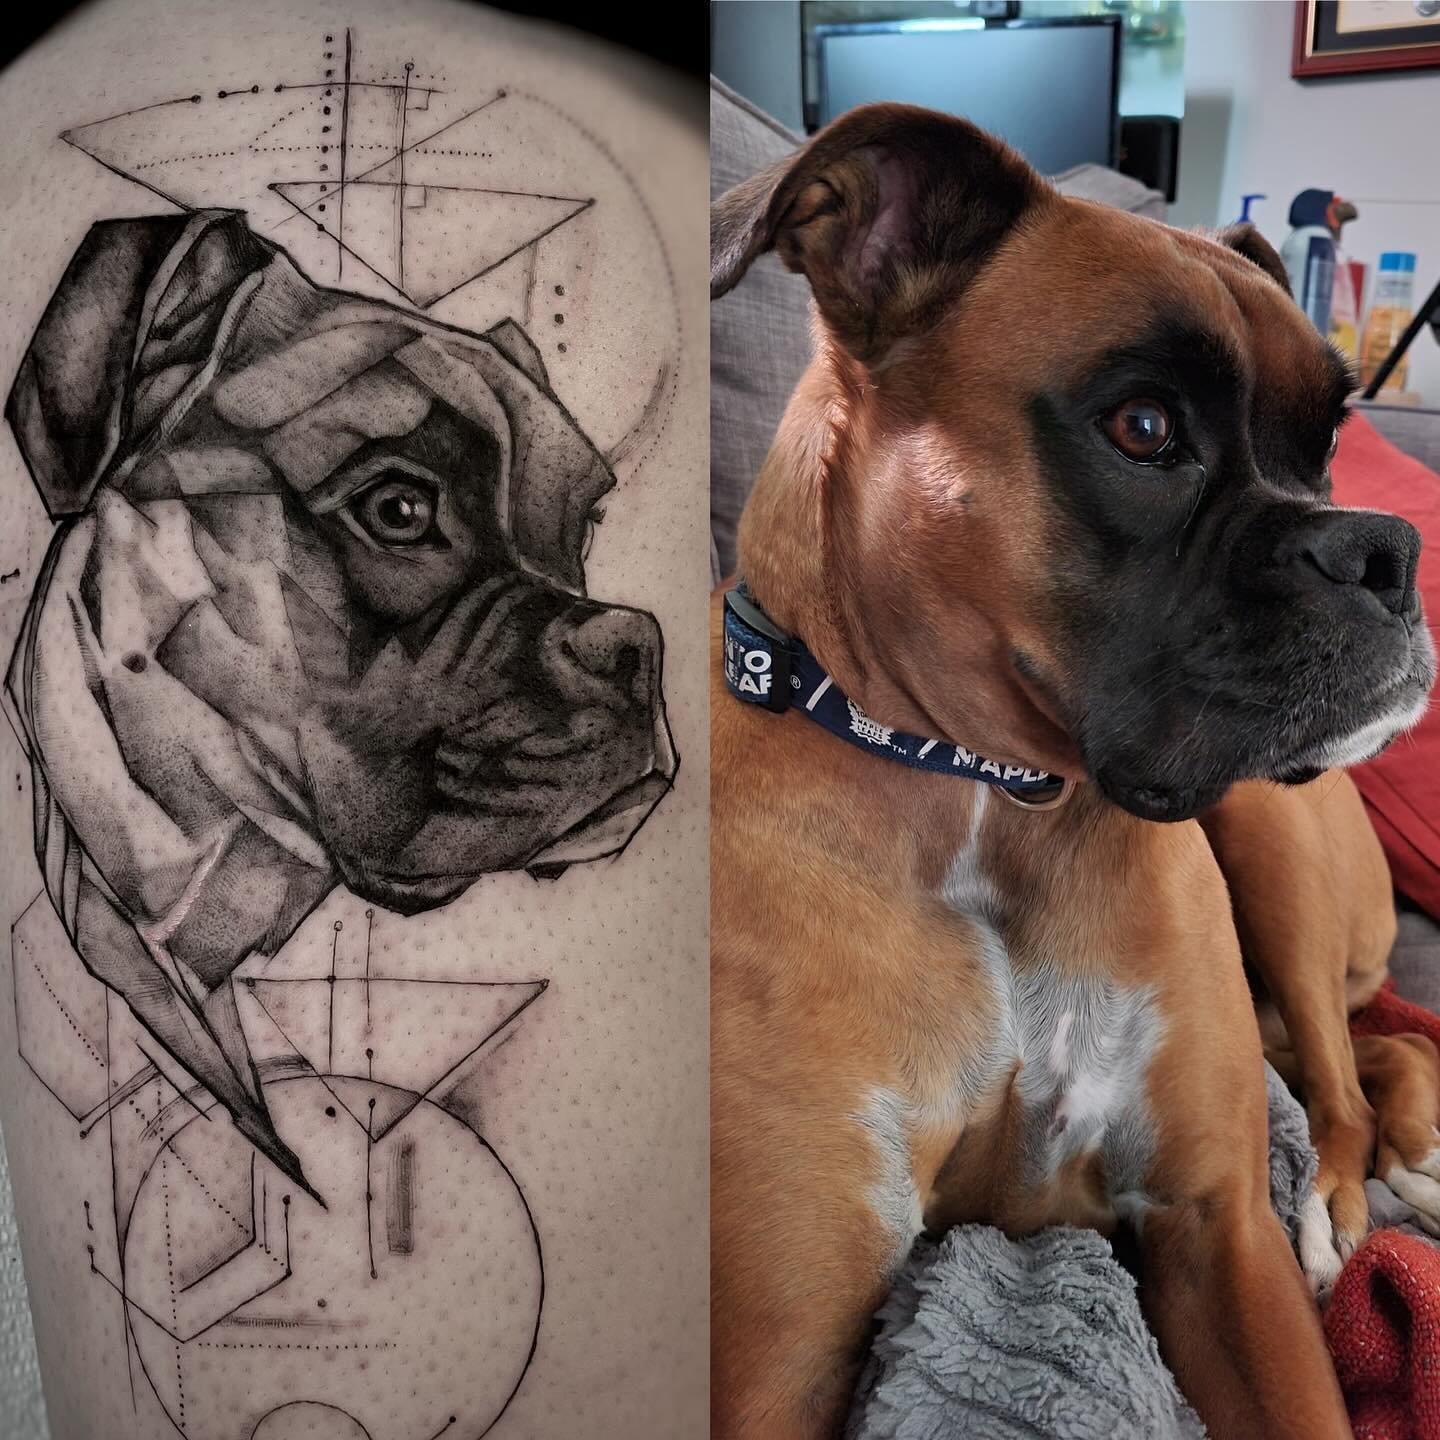 &ldquo; I have been looking to get a pet portrait for my dog Zoey who passed away about a year ago and I really think your style is a great fit for what I want. I am also a scientist (mathematician) so I like the idea of incorporating geometric shape